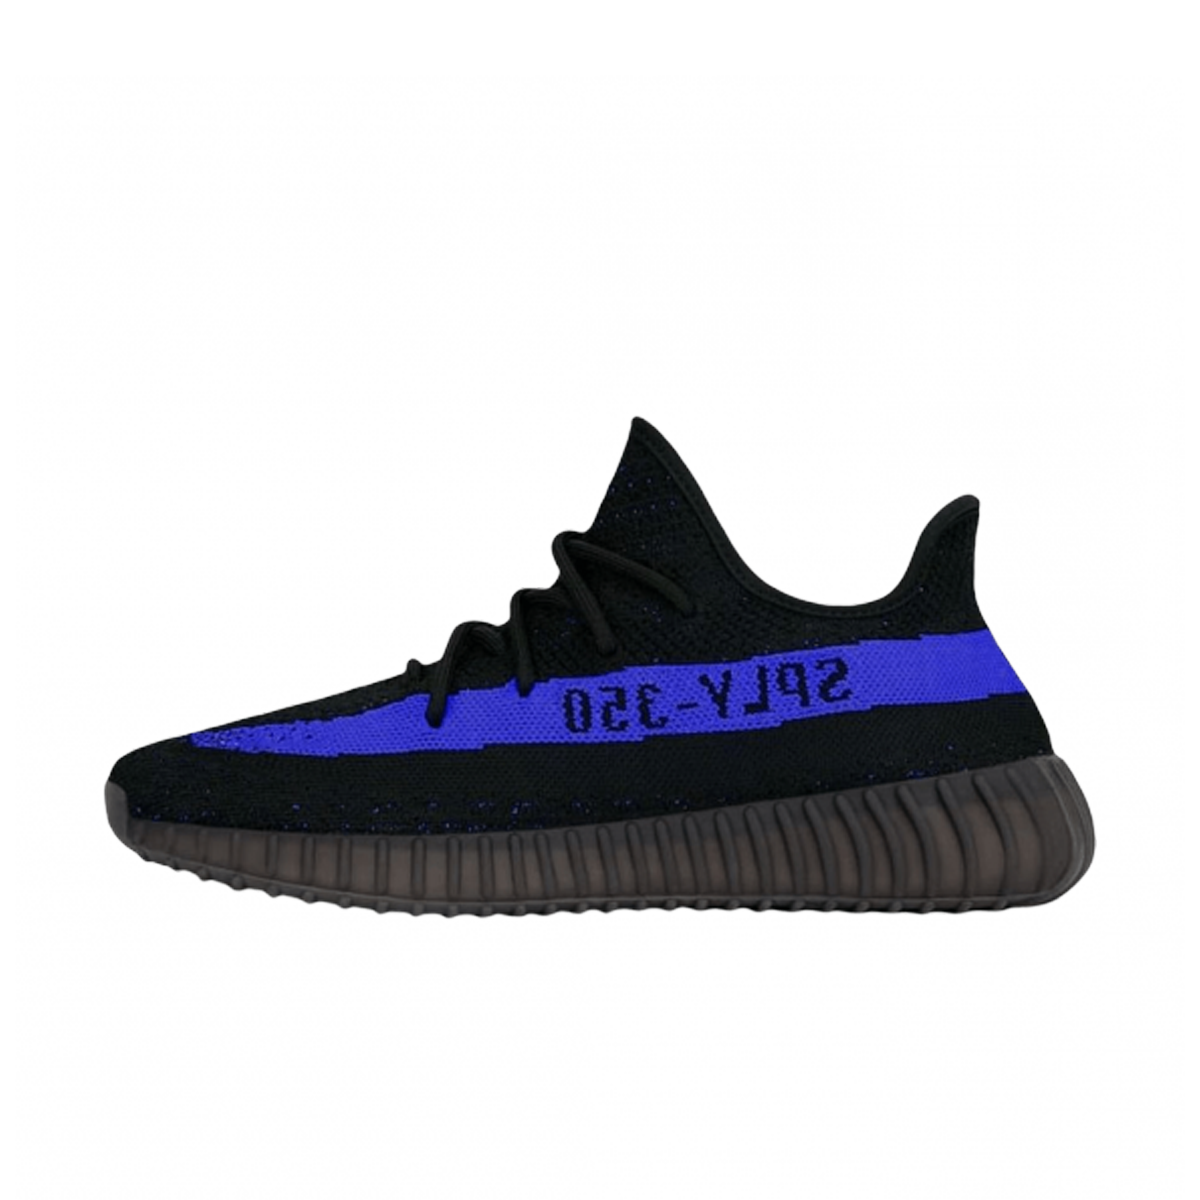 yeezy 350 black and blue